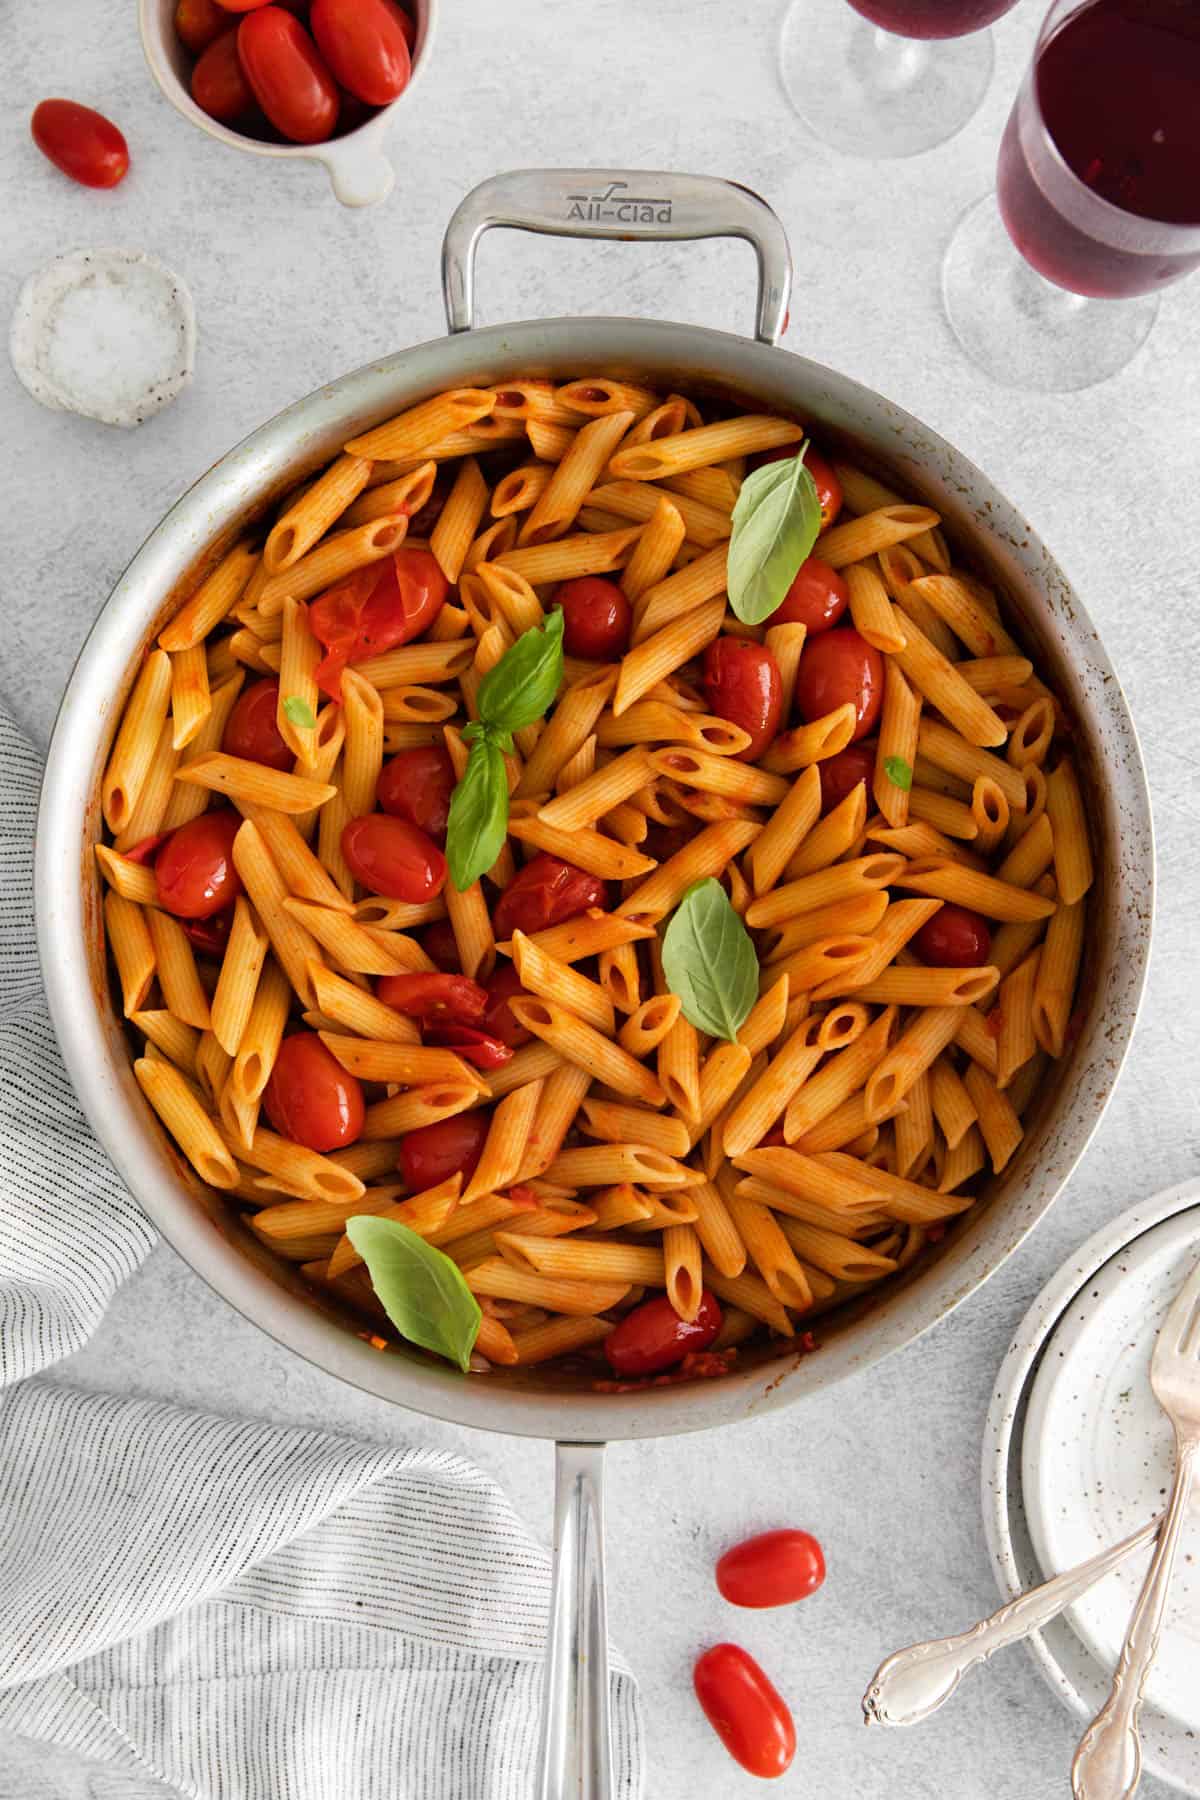 A large pan filled with penne all'arrabbiata garnished with fresh tomatoes and basil leaves.